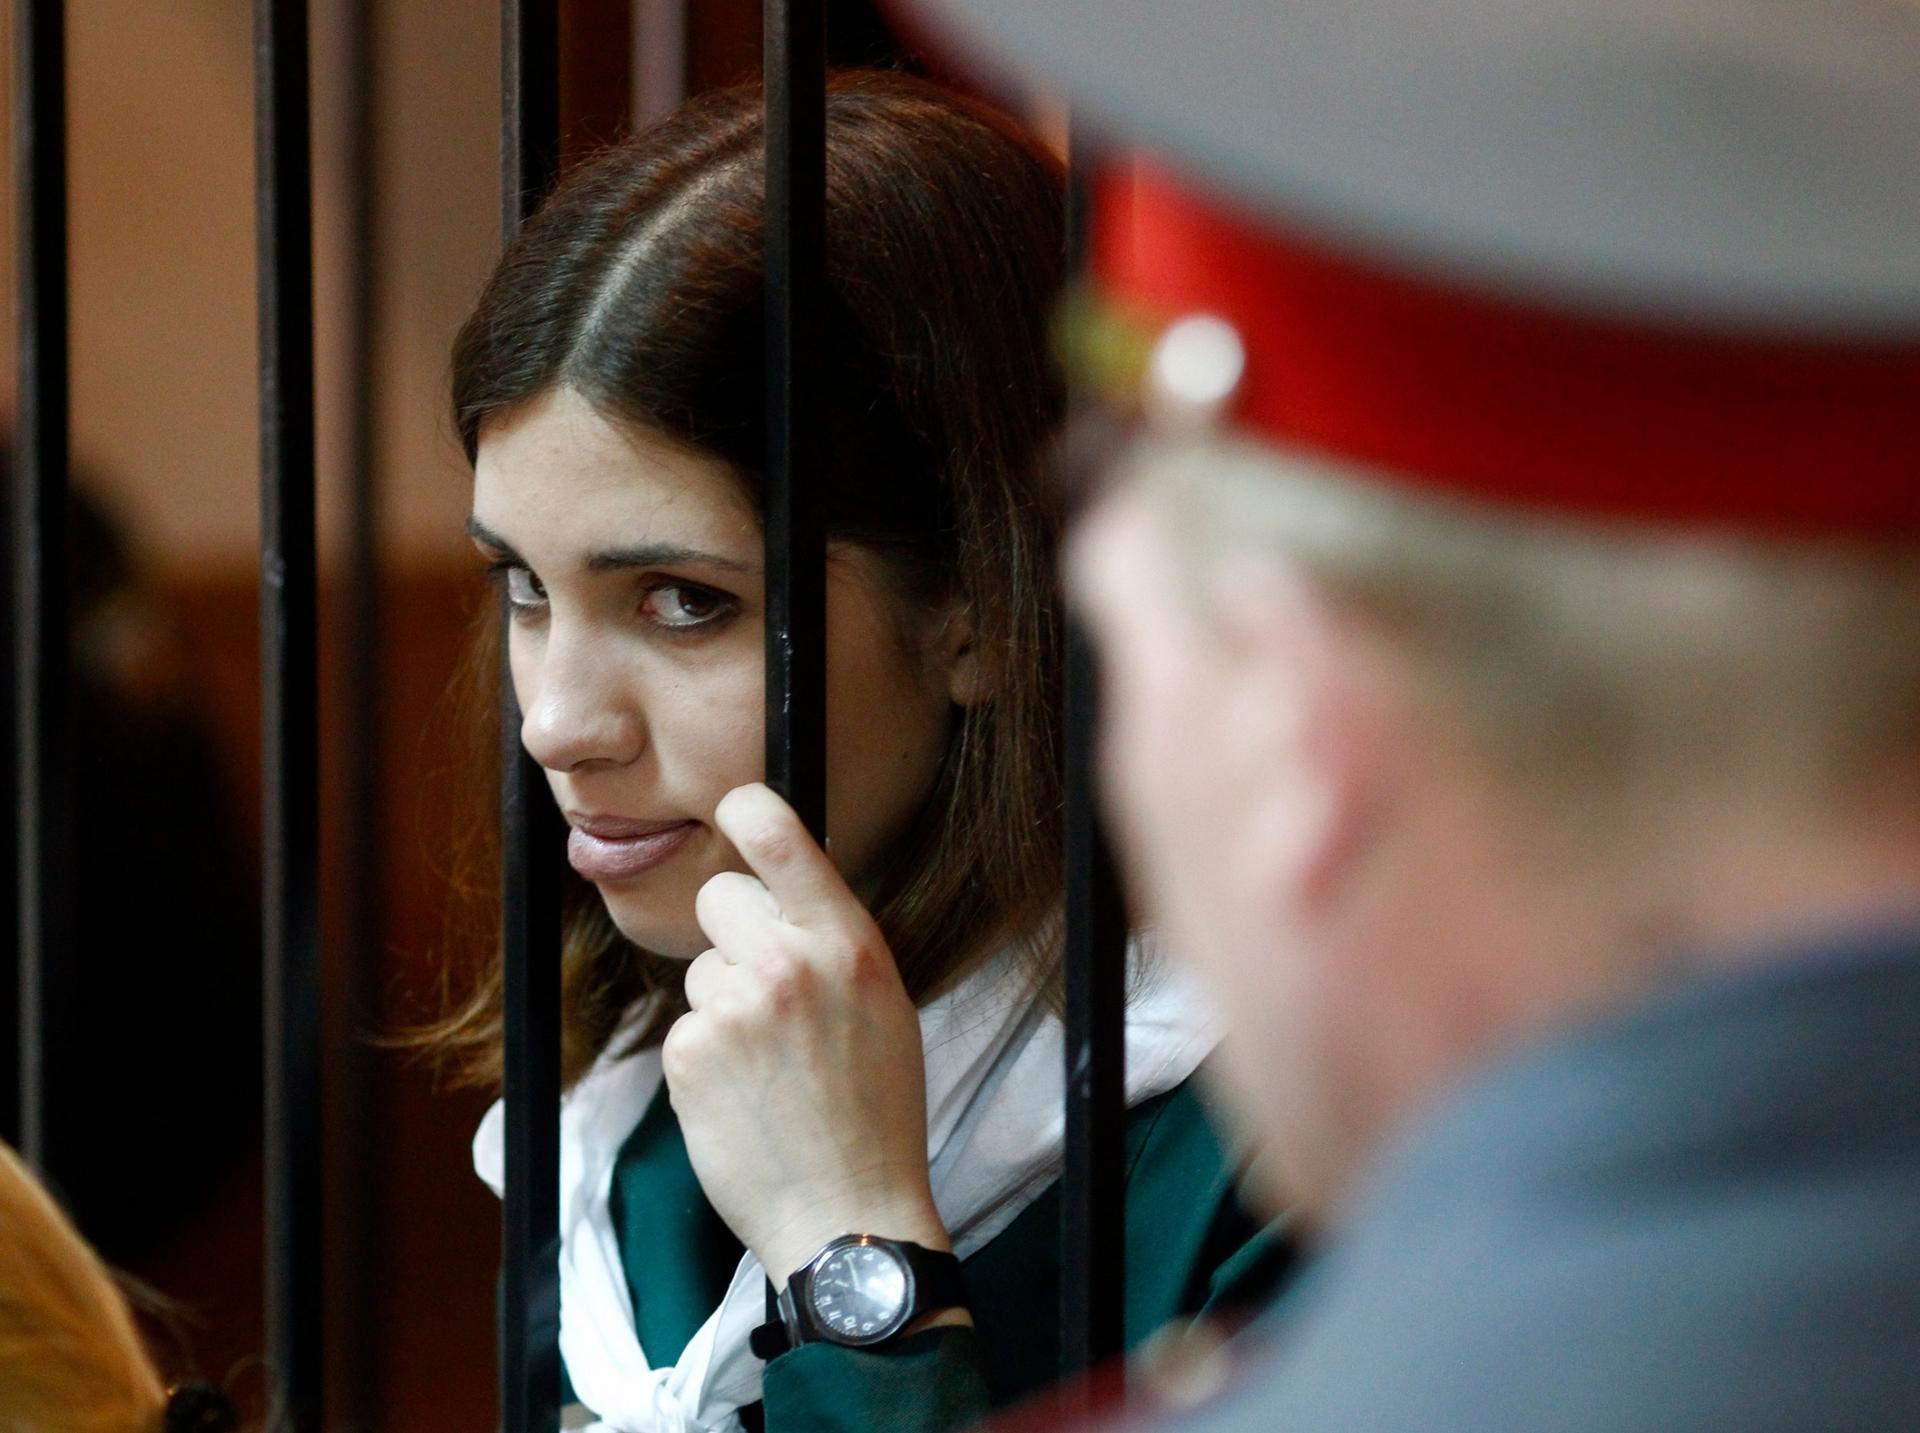 A young woman holds bars of a cell and peers out in a courtroom 